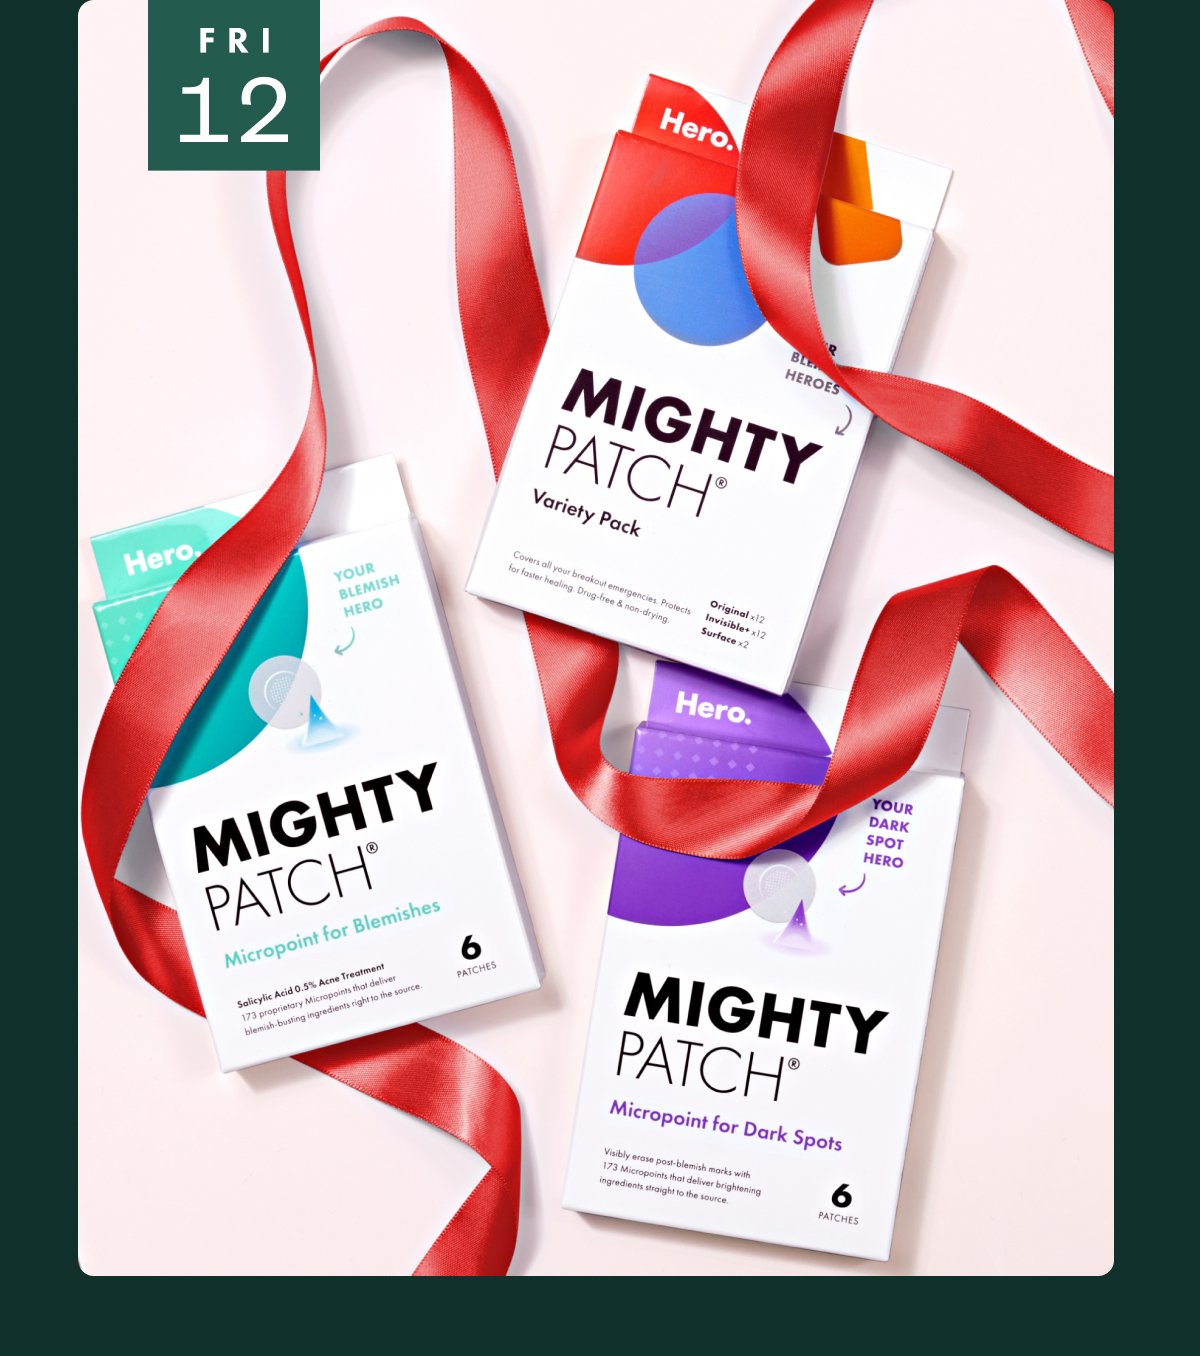 Mighty Patch Variety, Micropoint for Blemishes, and Micropoint for Dark Spots product holiday image with red ribbon.